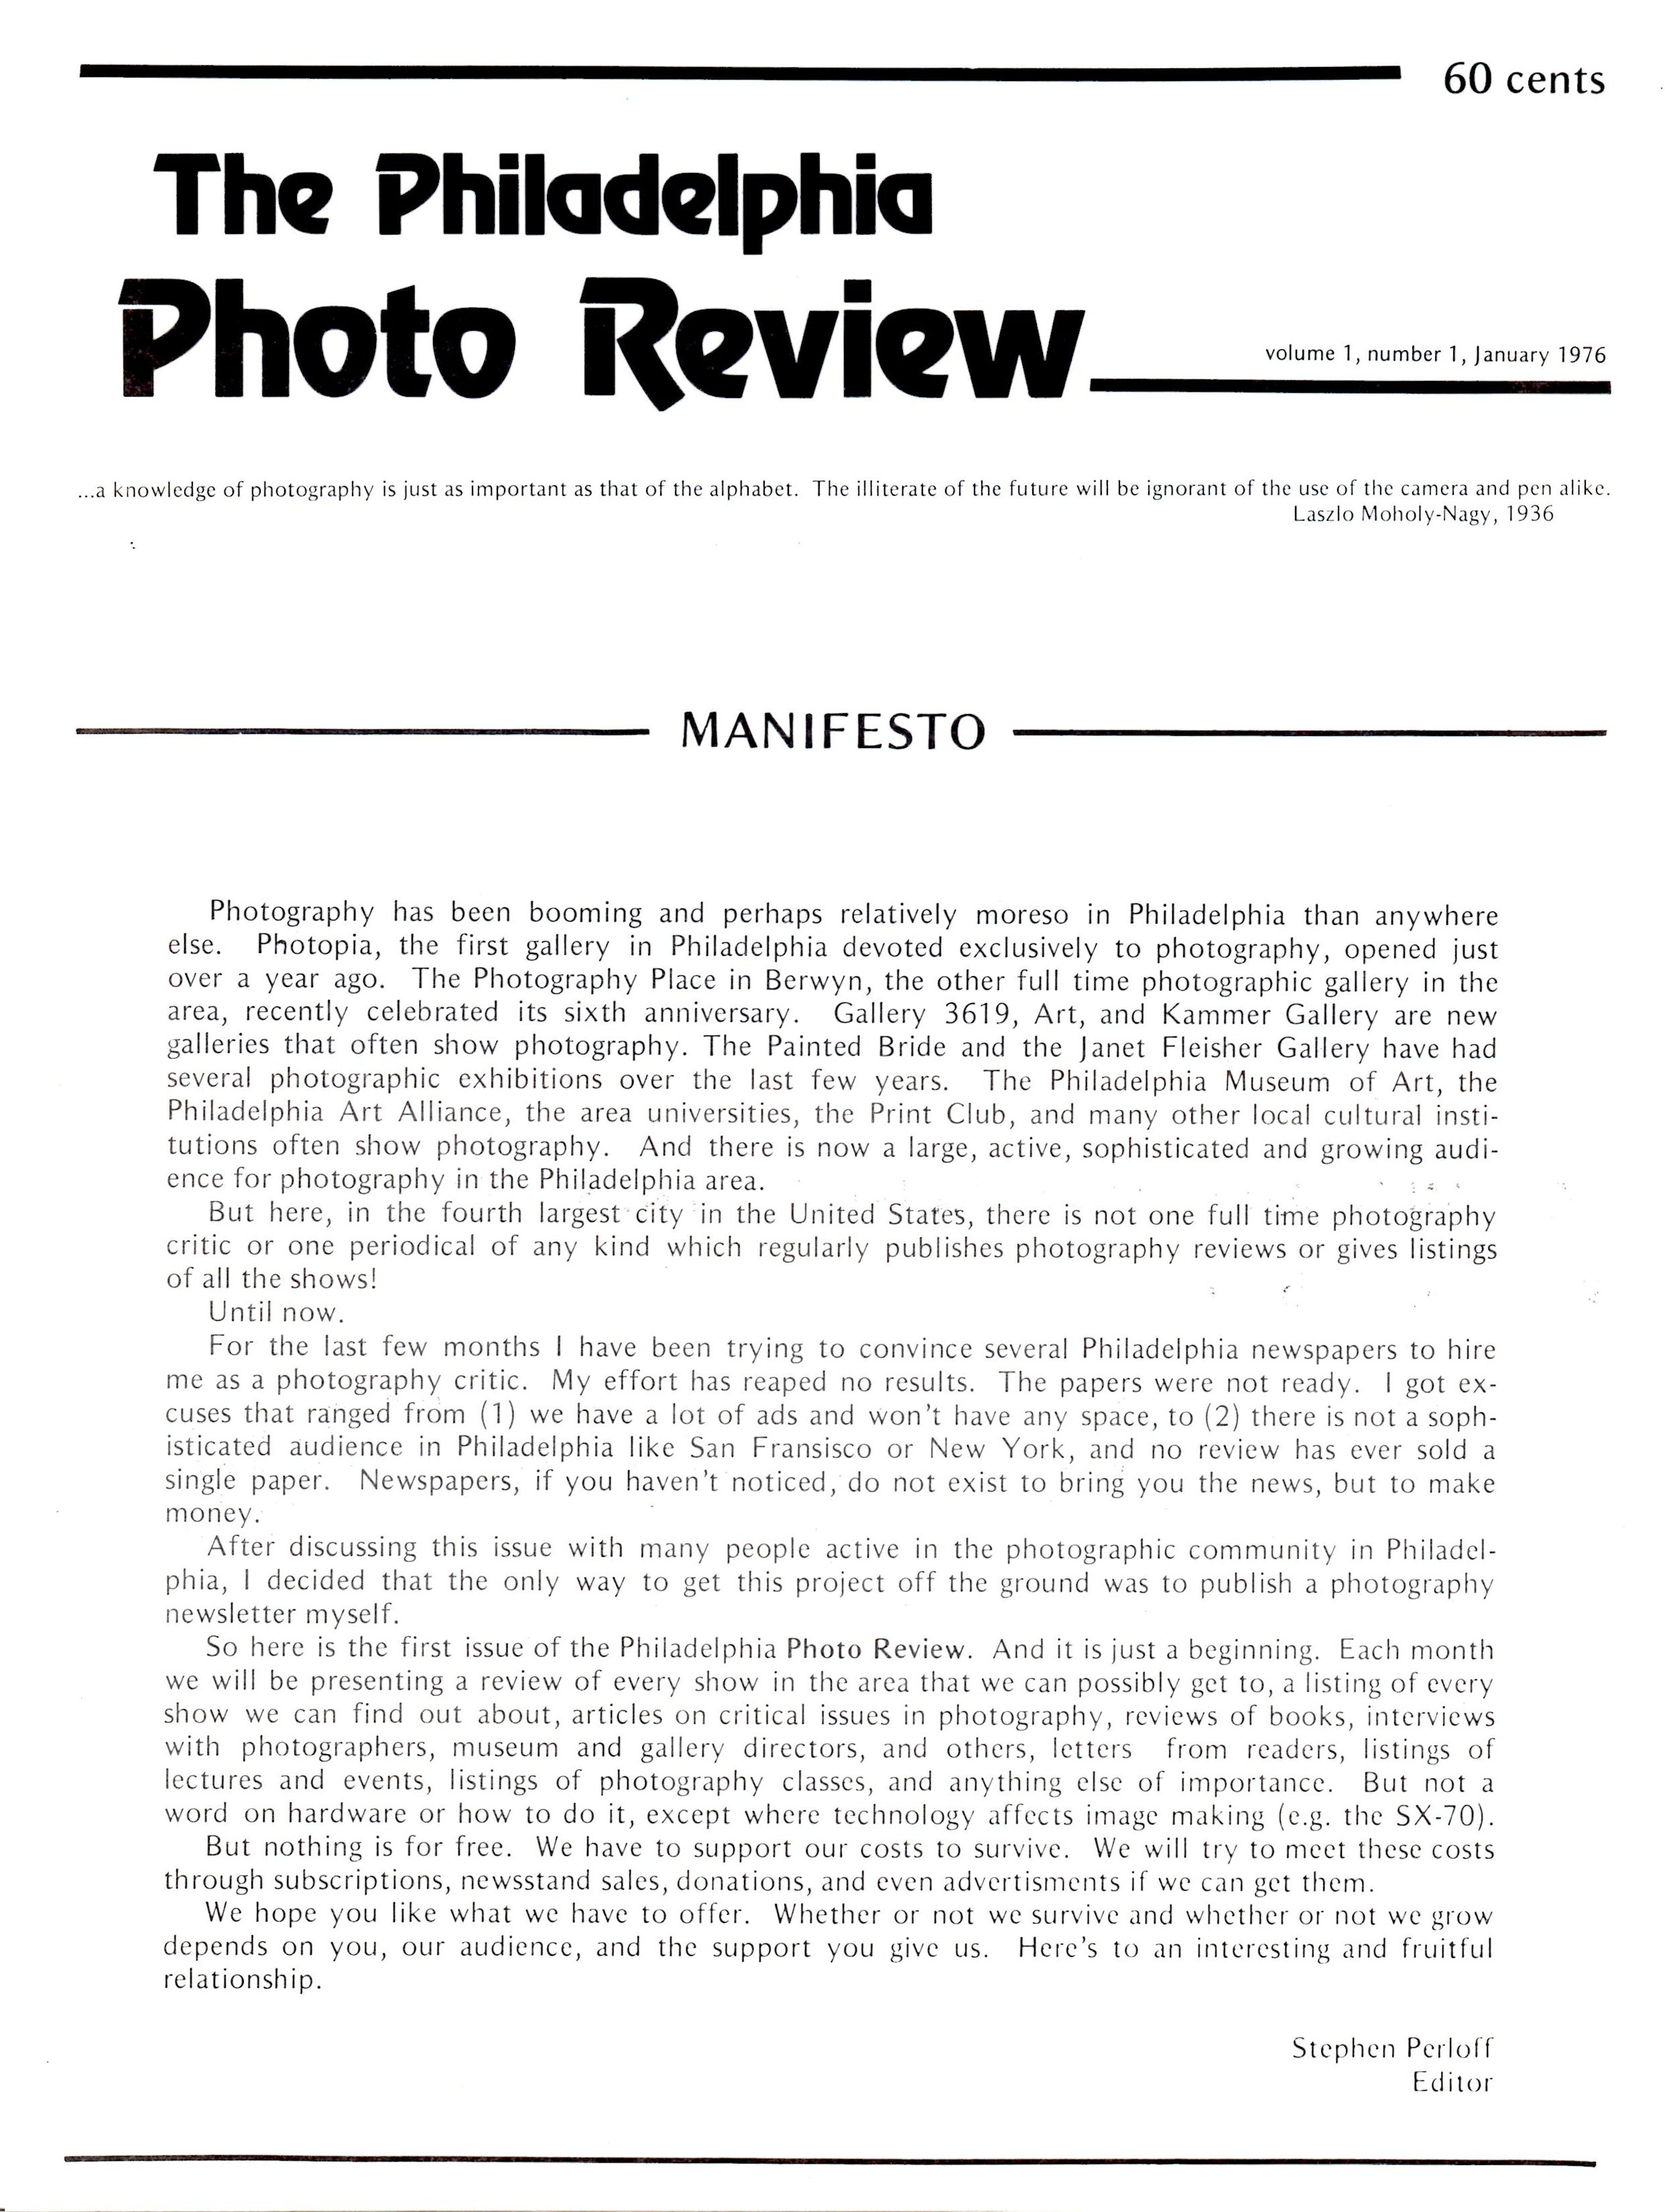 The 1st Photo Review